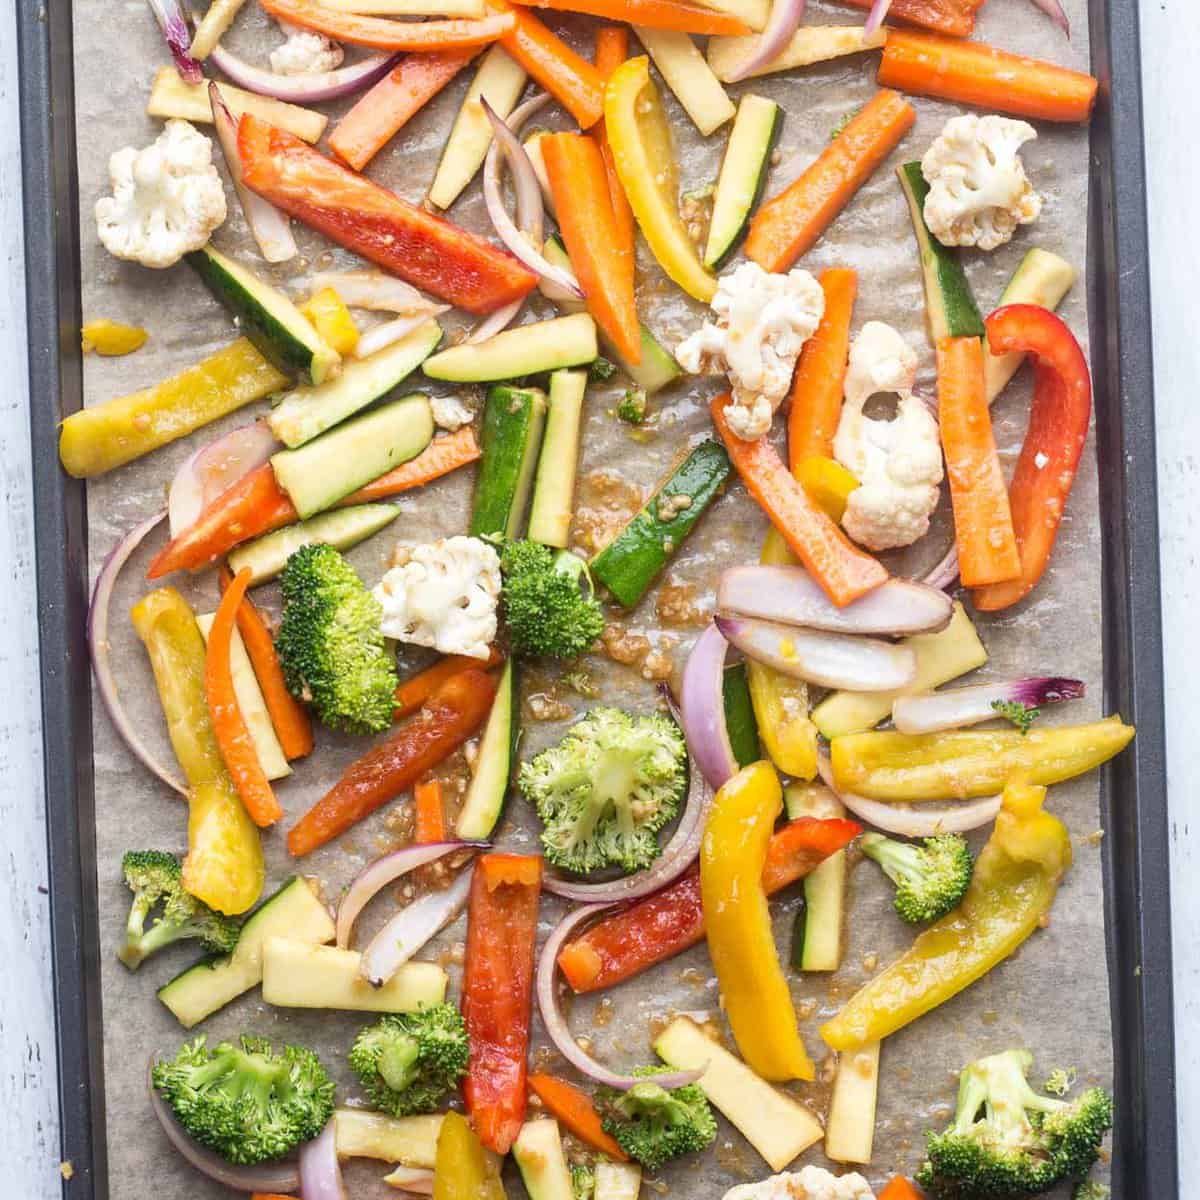 A baking pan with the vegetables spread out.